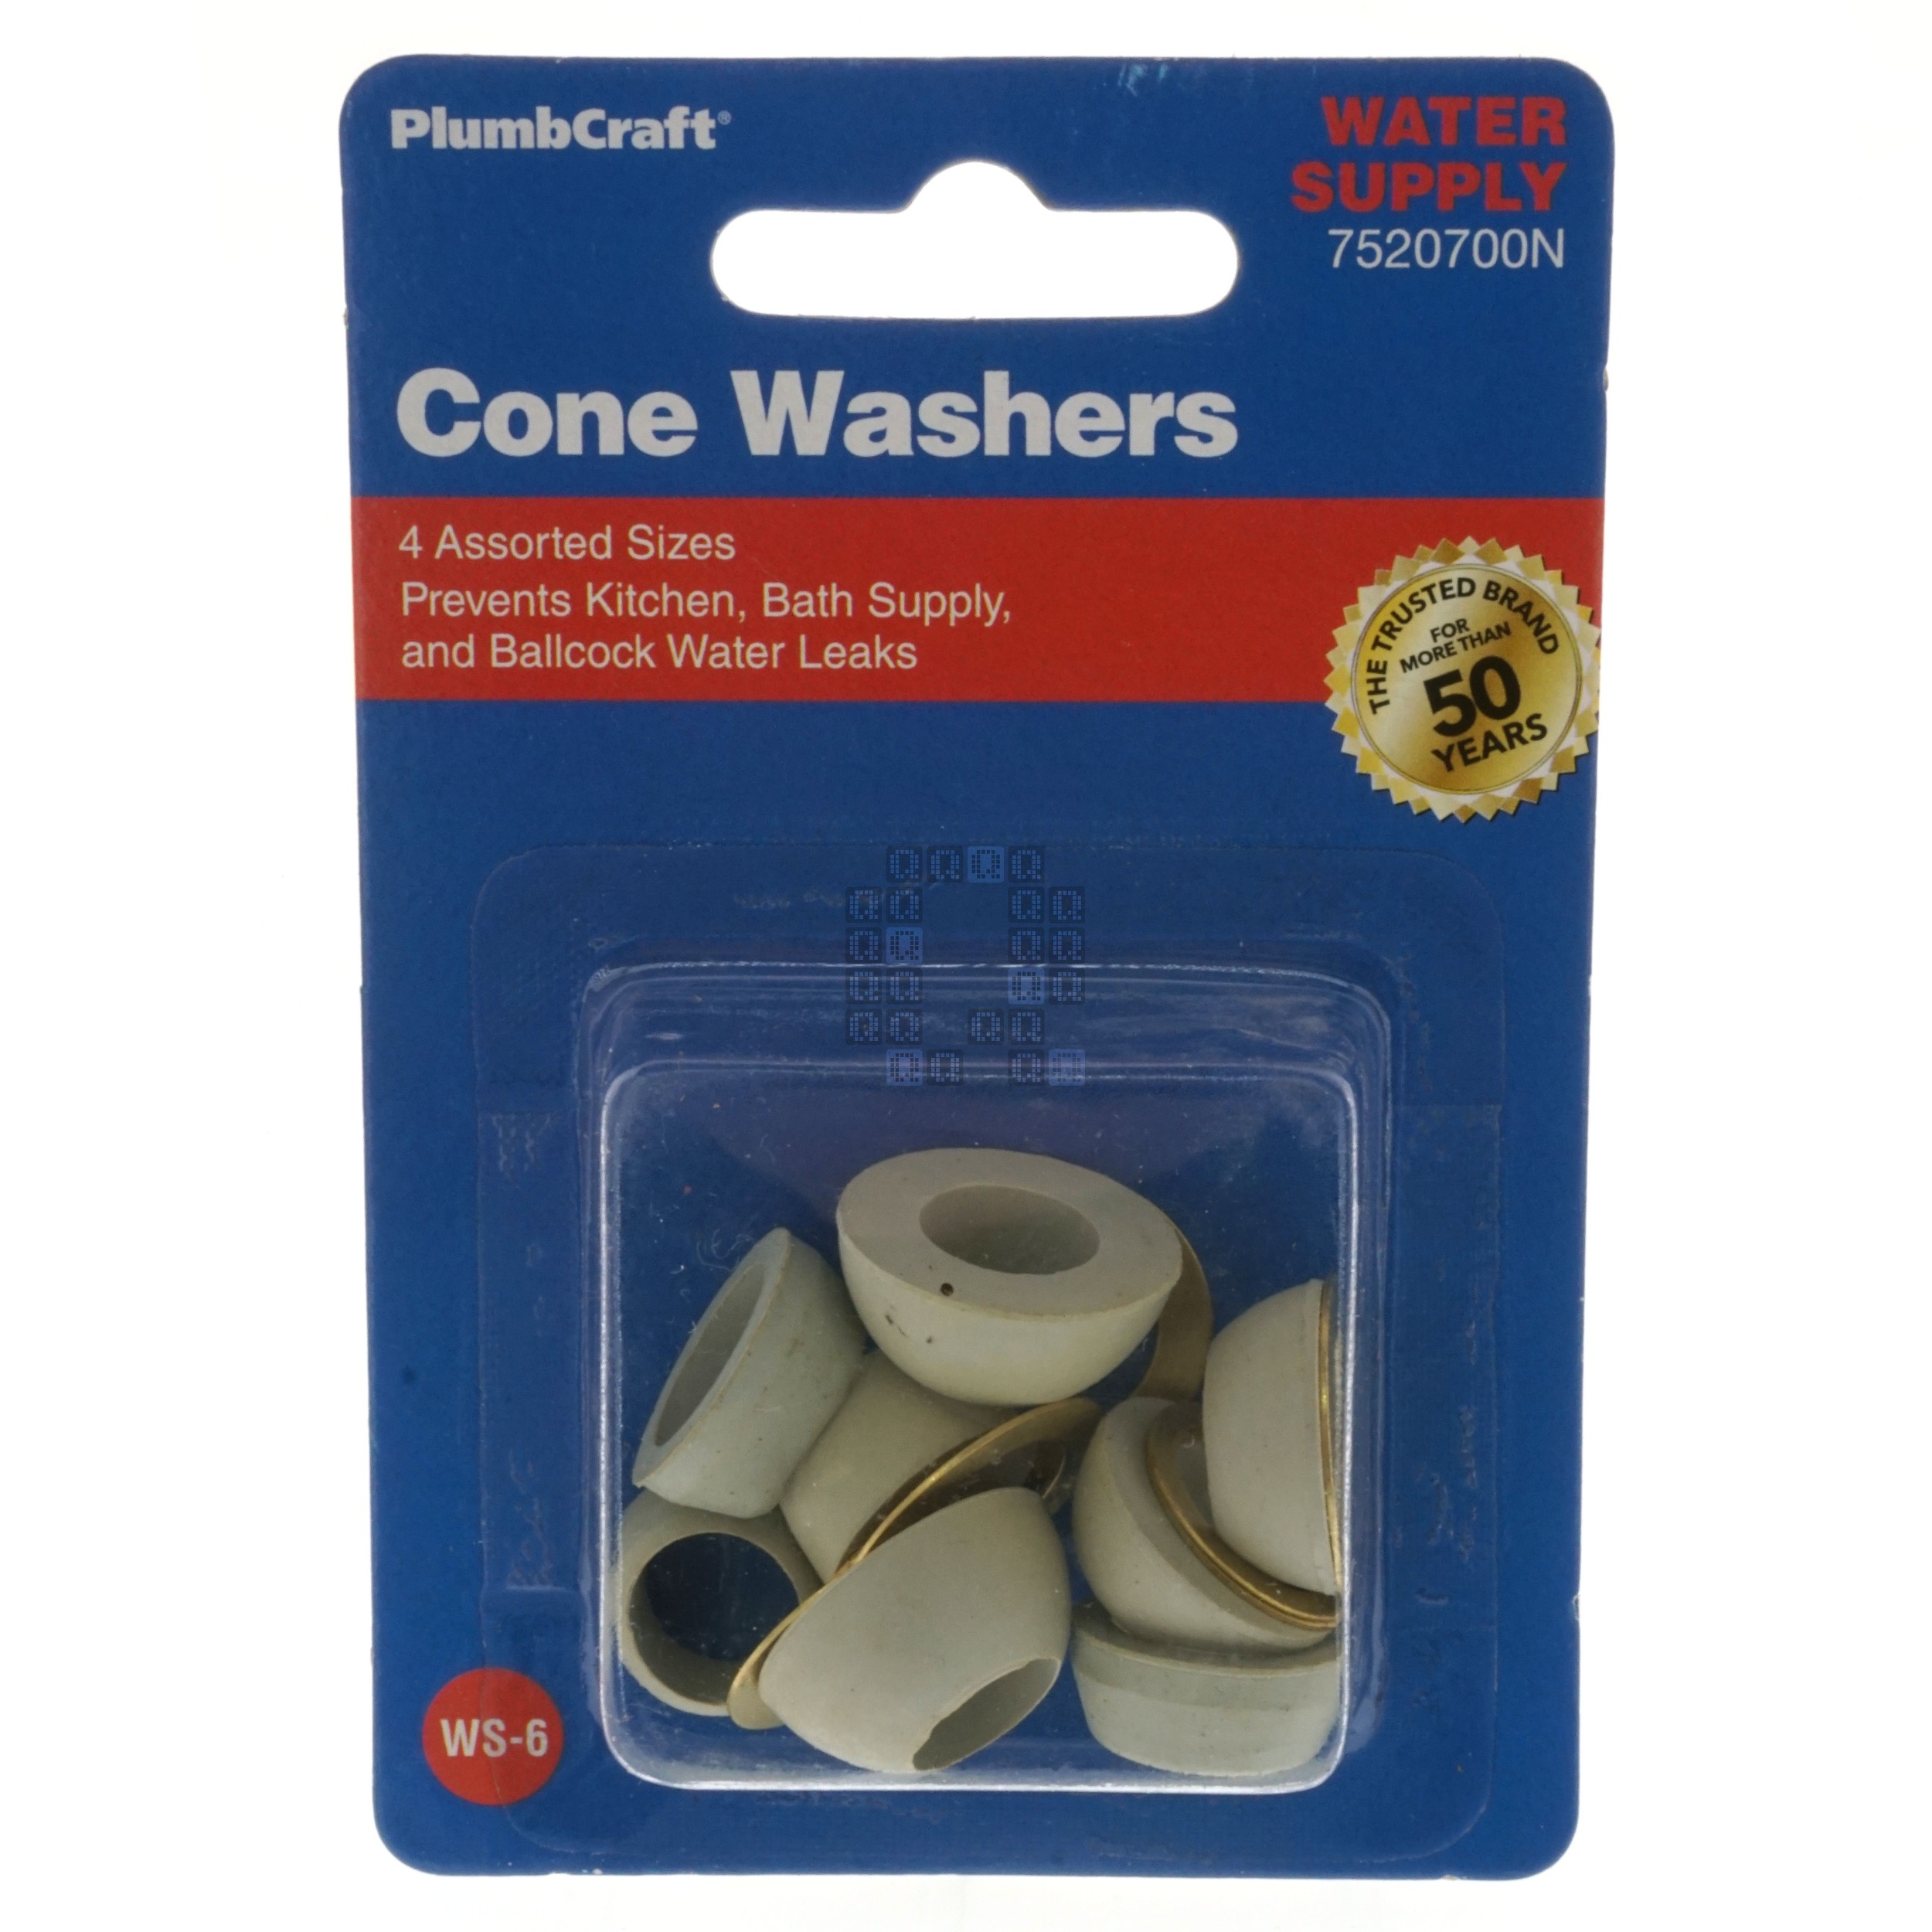 Plumbcraft 7520700N 8-Piece Cone Washer and Brass Washer Assortment